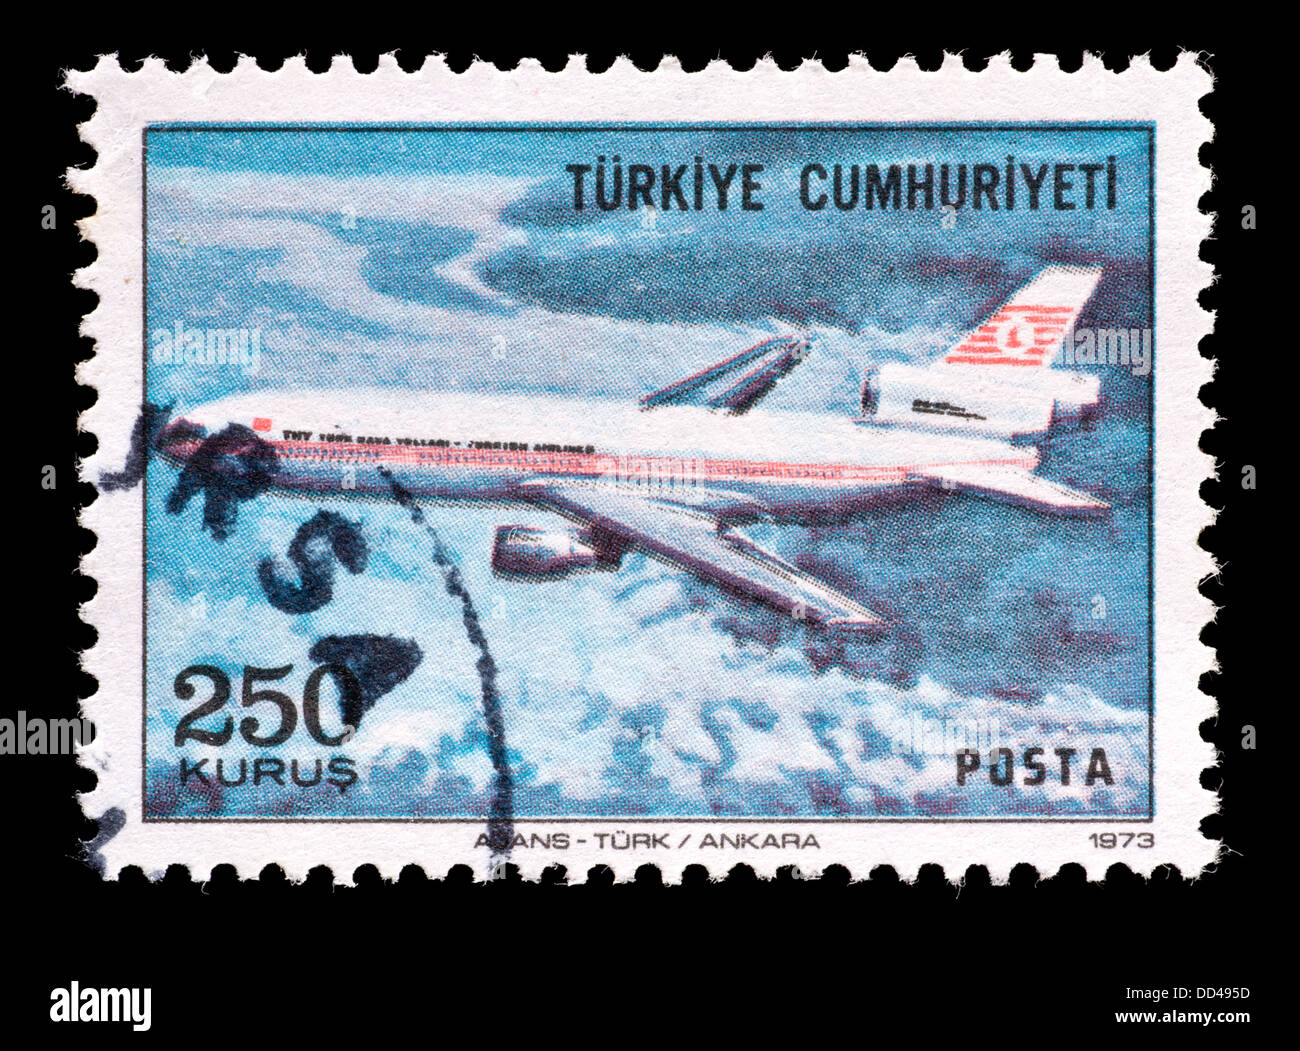 Postage stamp from Turkey depicting a DC-10 in flight. Stock Photo